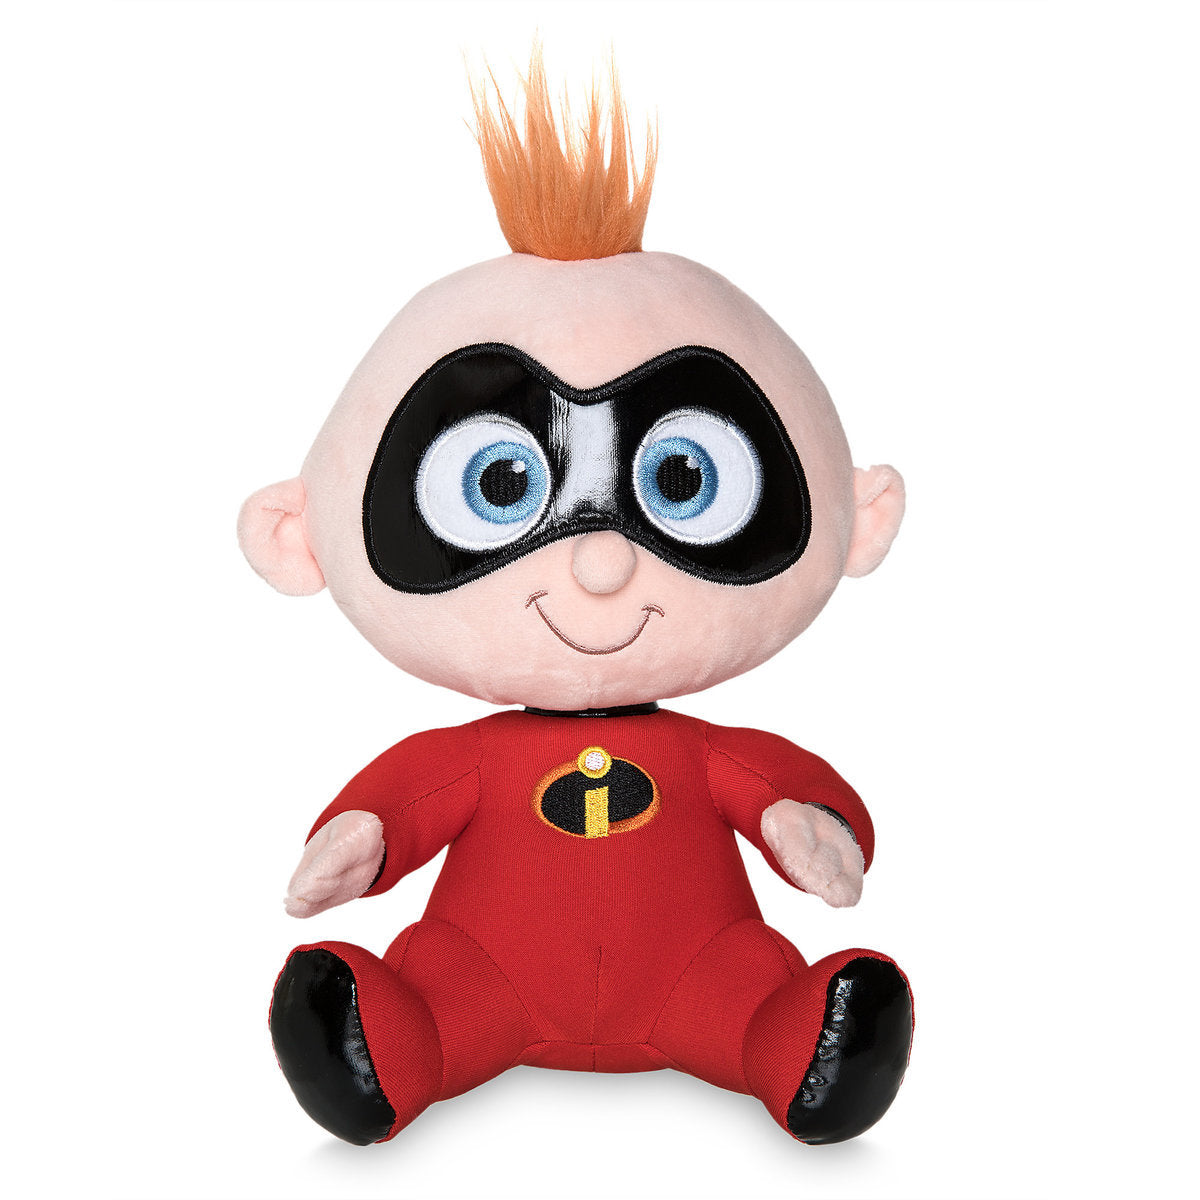 BABY JACK PLUSH CLIP ON NEW  WITH TAGS THE INCREDIBLES 3 1/2"  PARTY SUPPLIES 